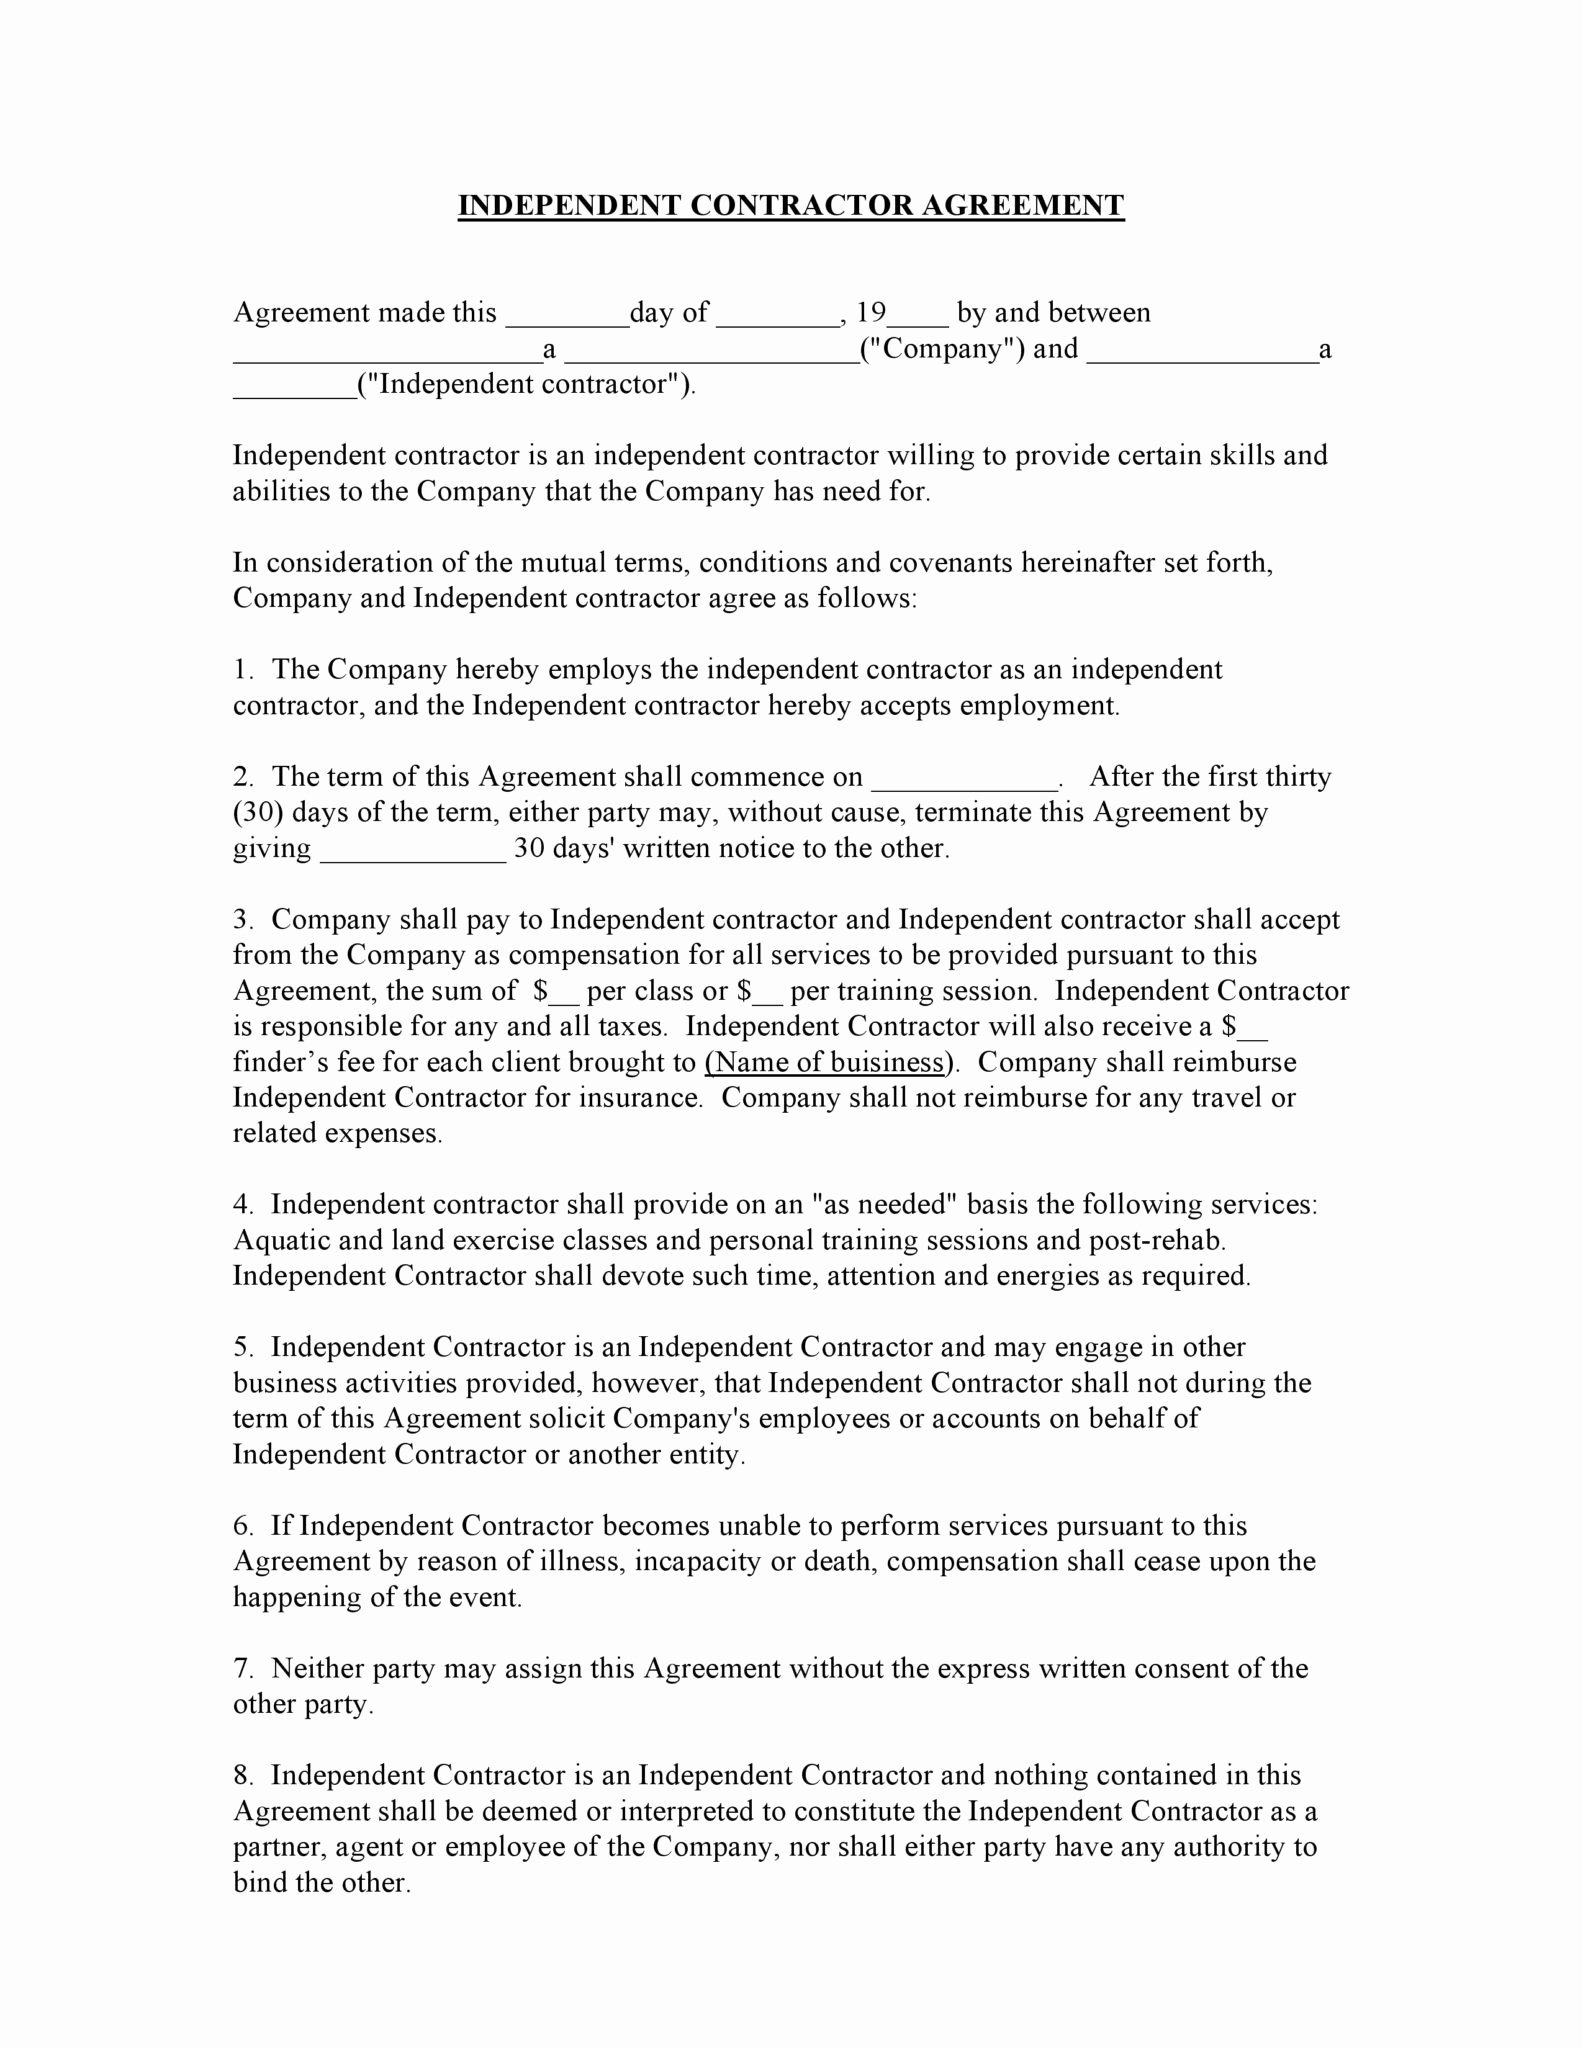 Personal Services Contract Template Beautiful Free Printable Independent Contractor Agreement